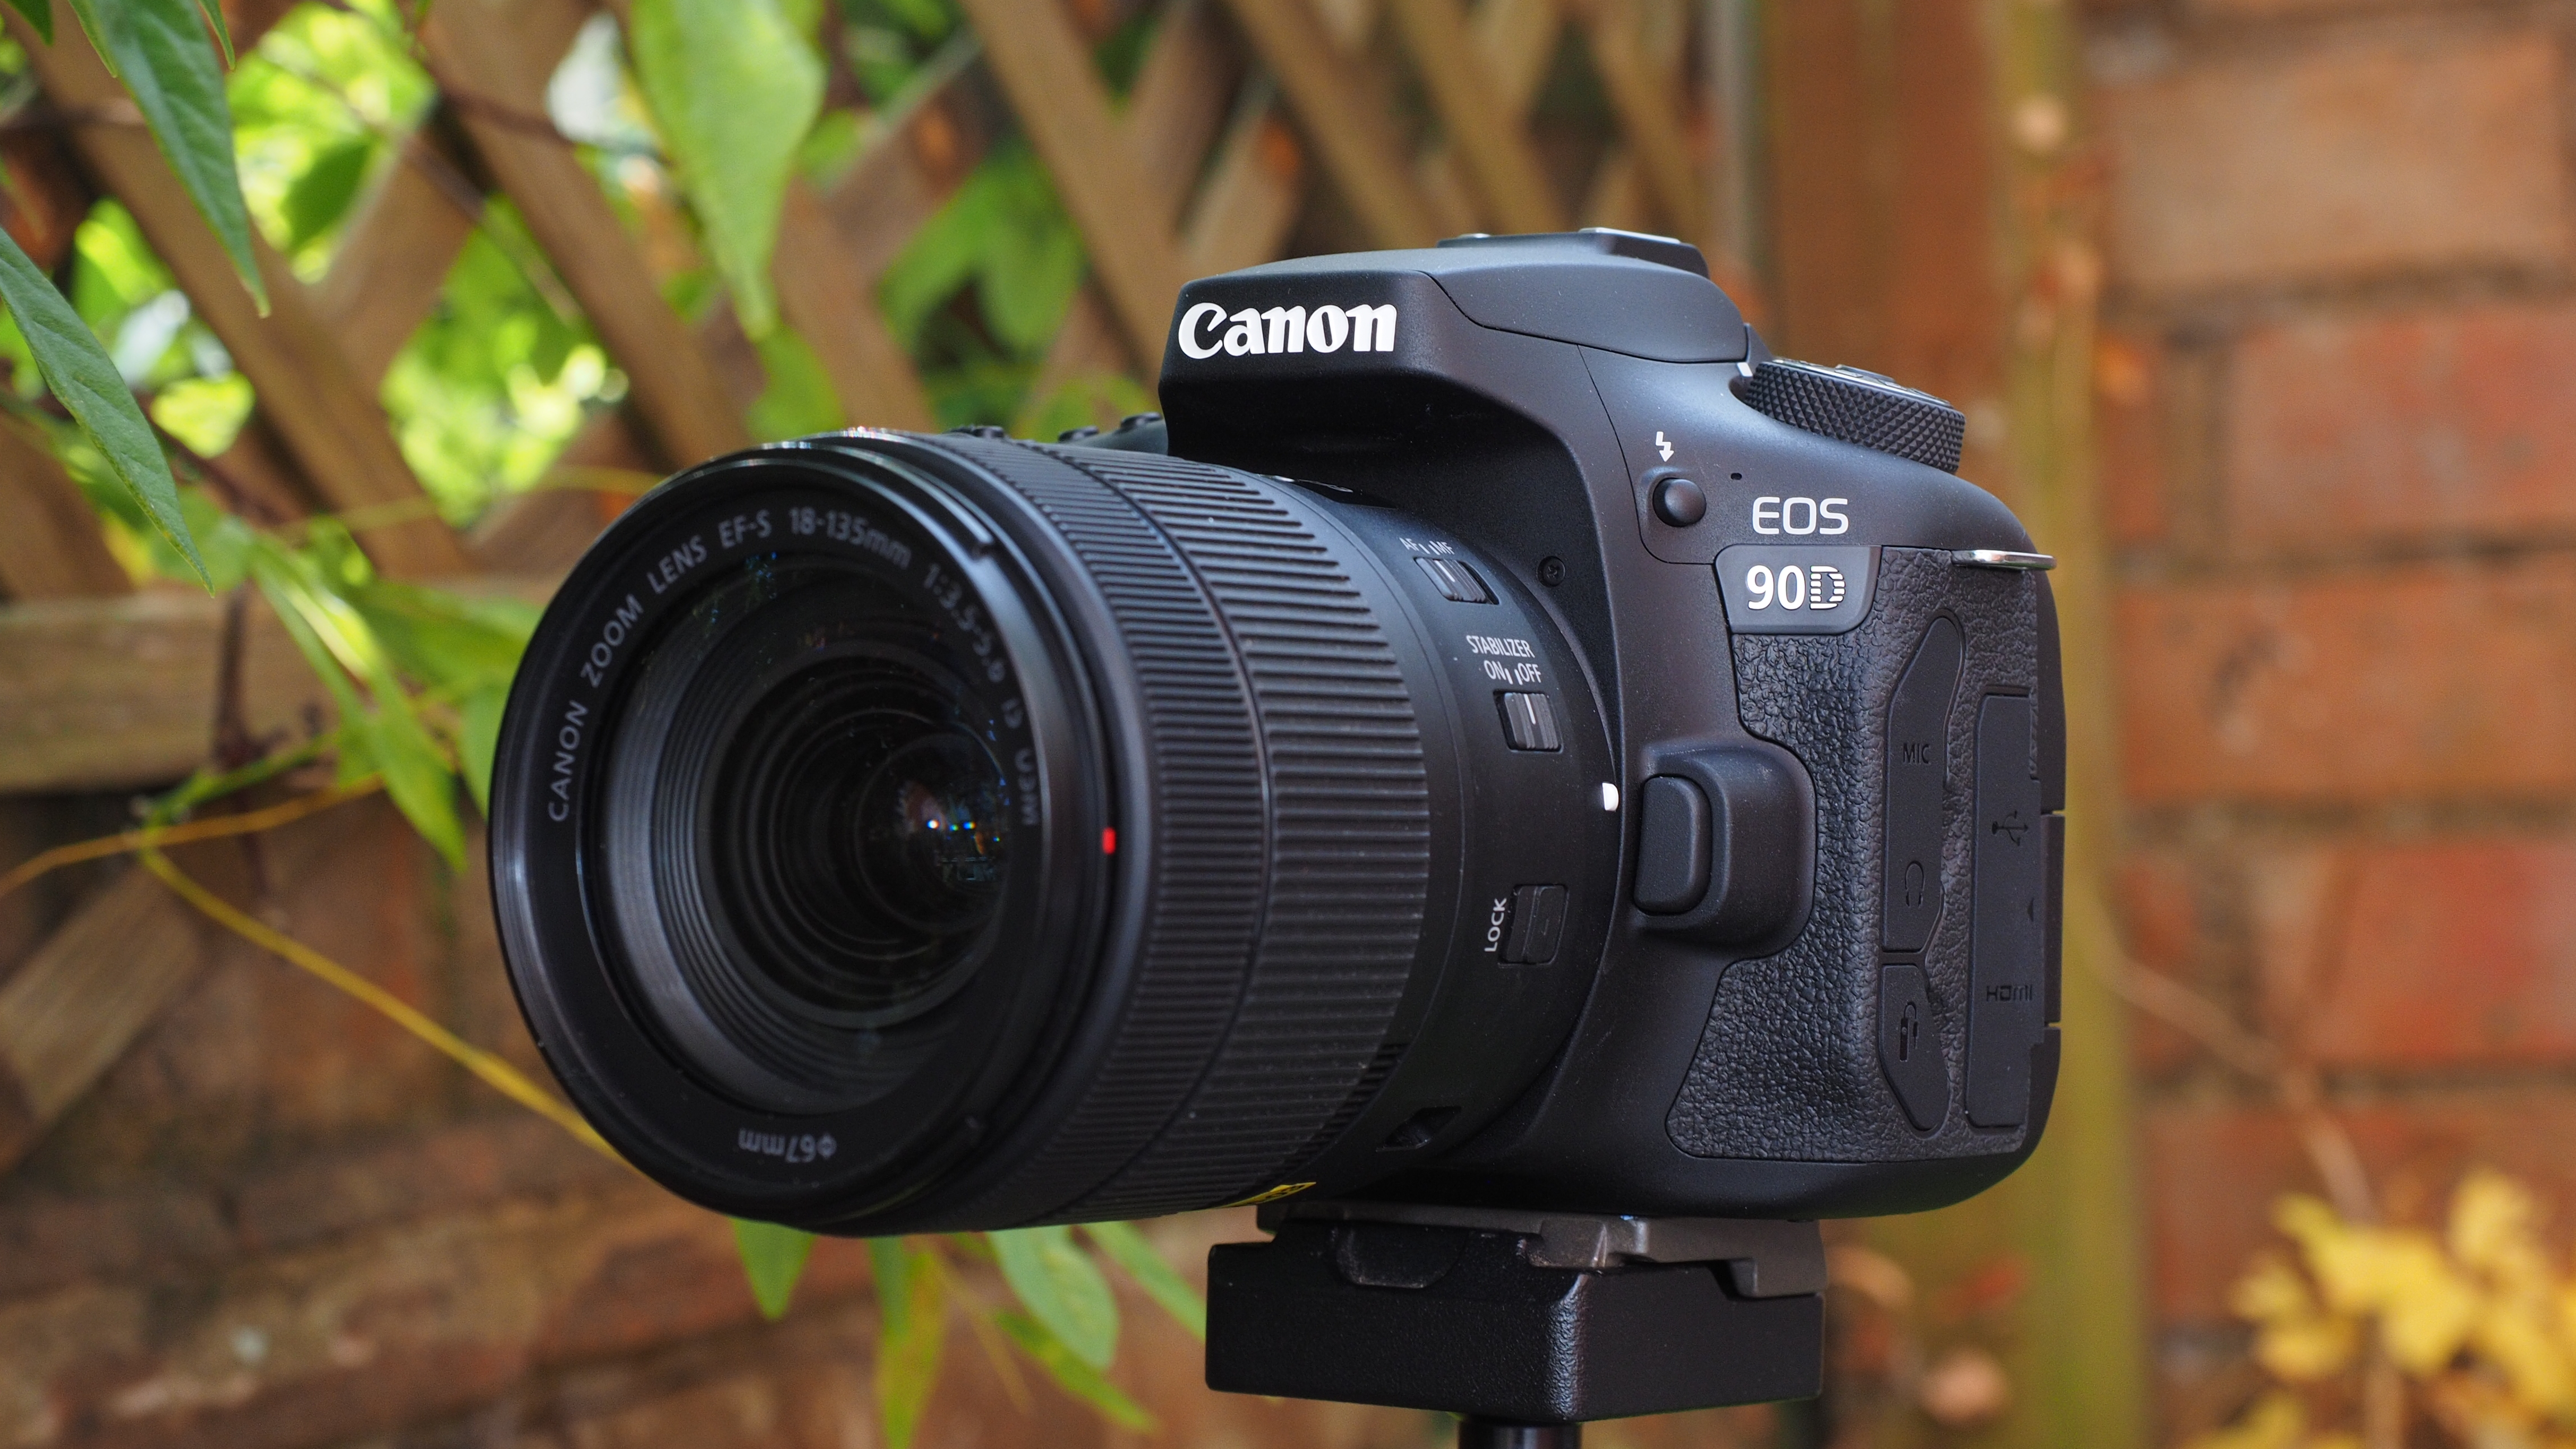 Best camera: Canon EOS 90D